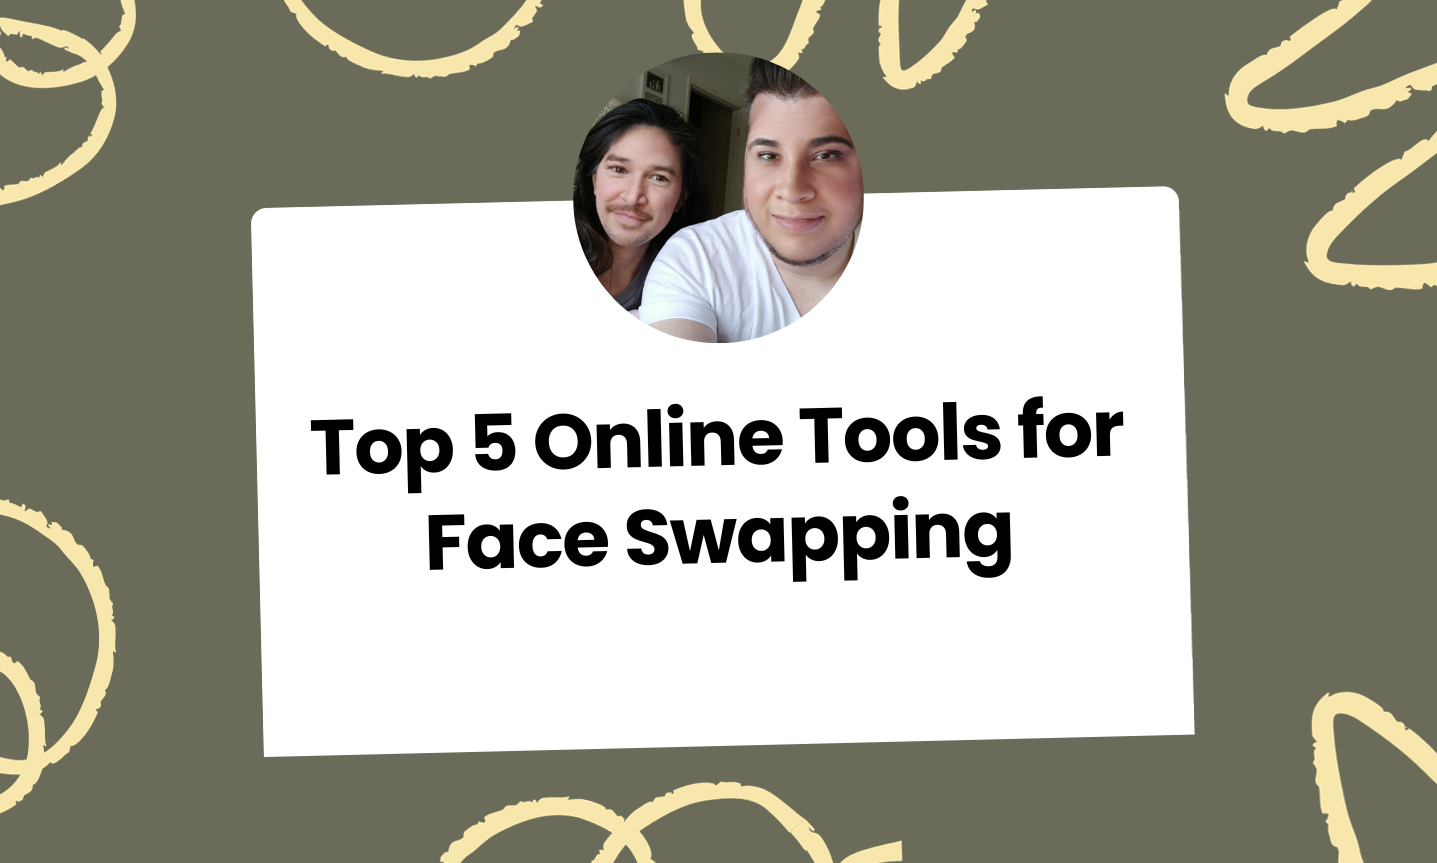 Top 5 Online Tools for Face Swapping